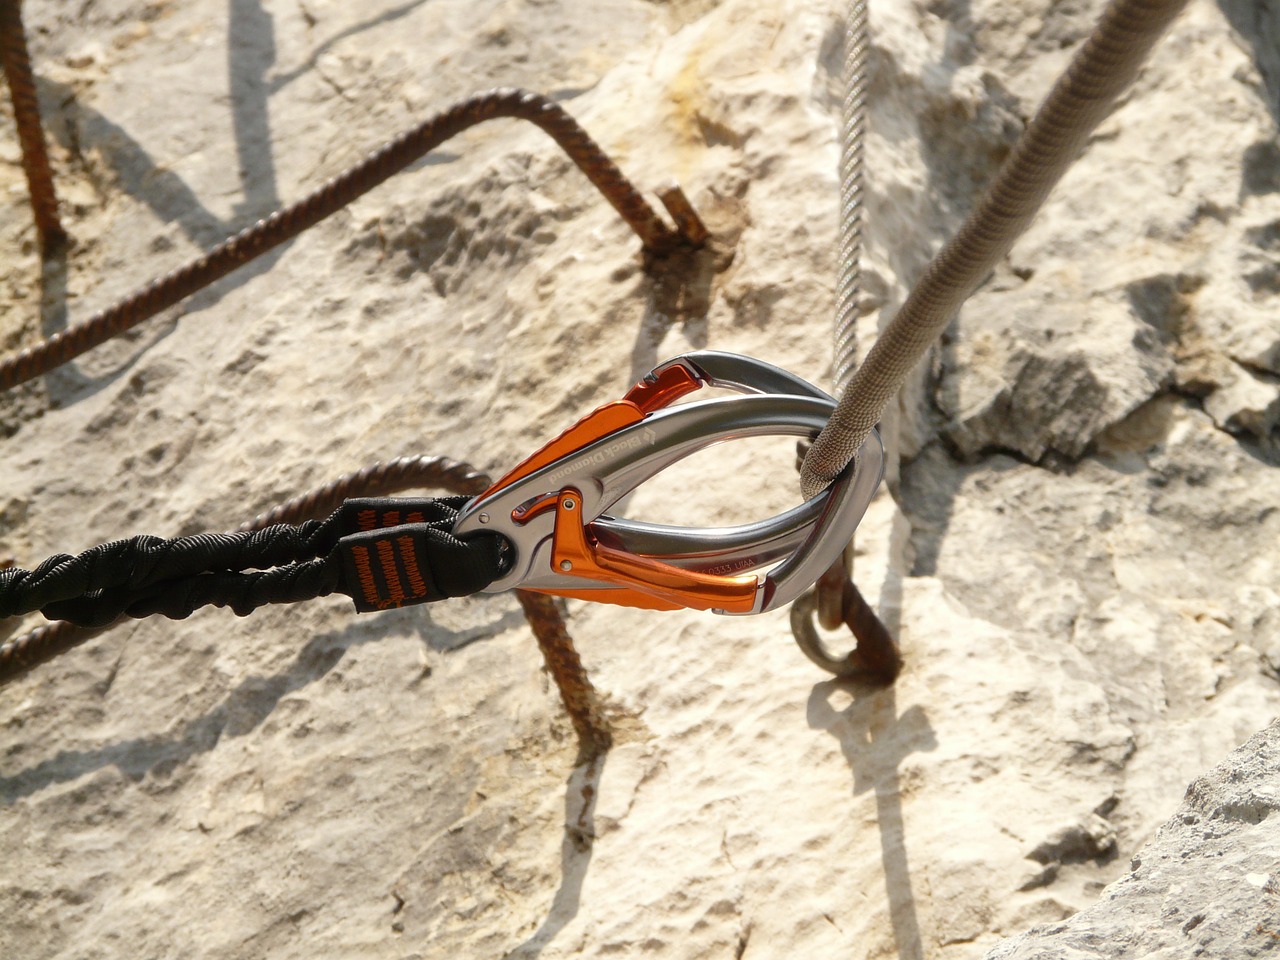 carbine,rope,hook,backup,climbing,via ferrata,rope up,security,redundancy,steel cable,anchoring,free pictures, free photos, free images, royalty free, free illustrations, public domain